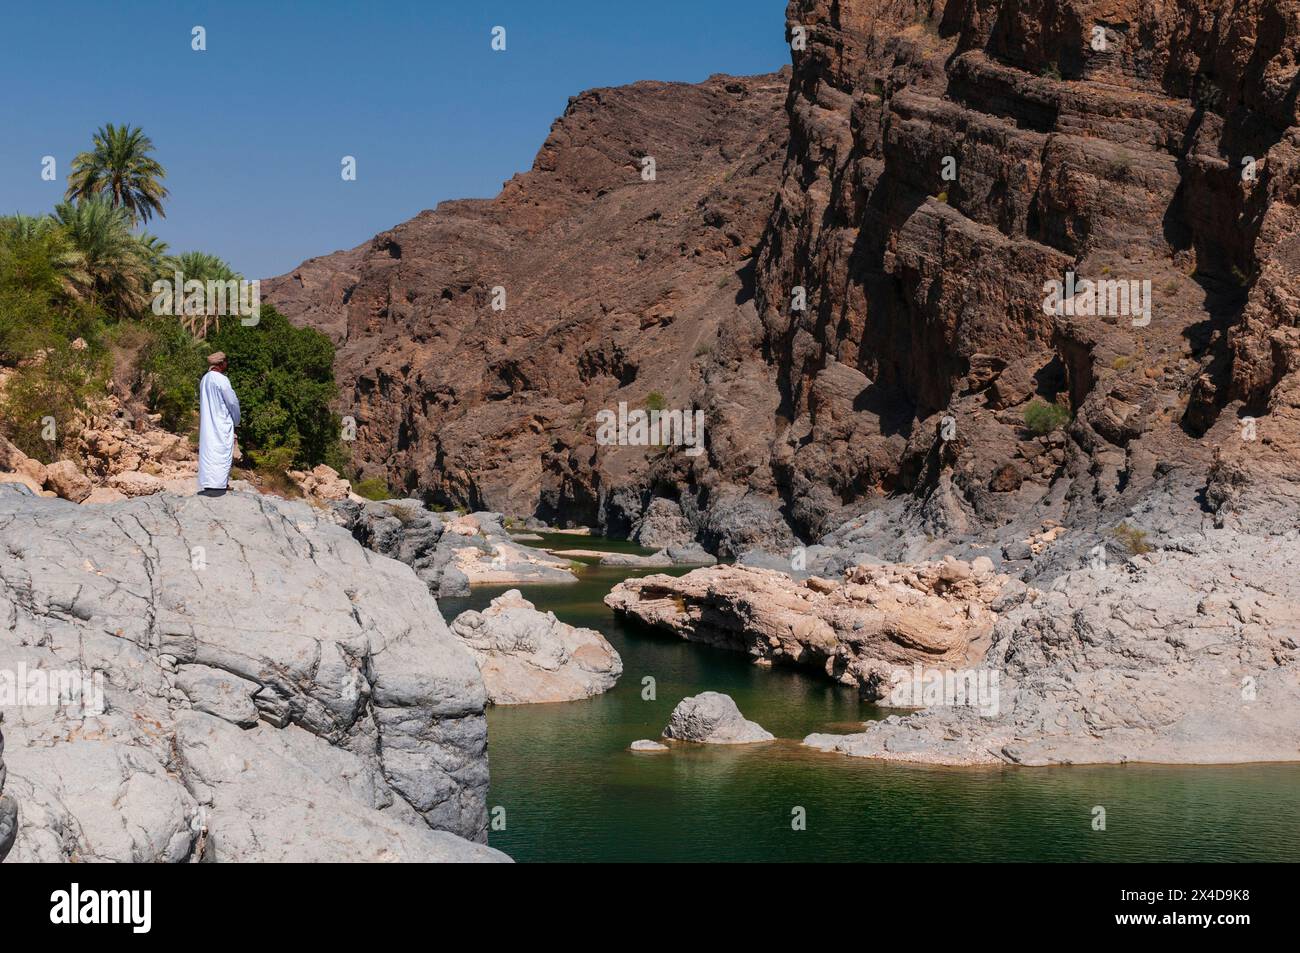 A man looking out over a natural pool in Wadi Al Arbeieen, Oman. Stock Photo